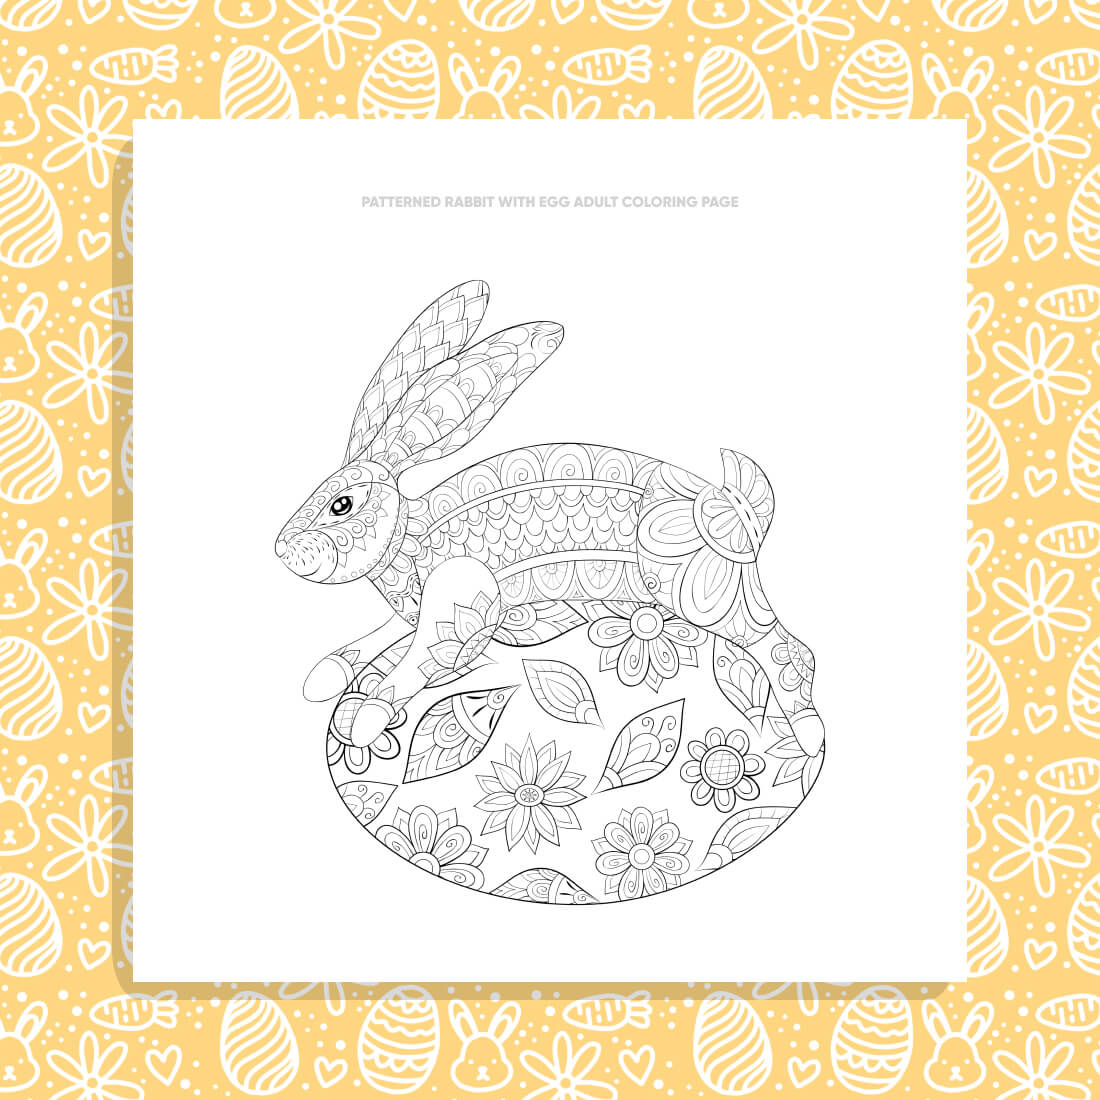 Patterned Rabbit with Egg Adult Coloring Page preview image.